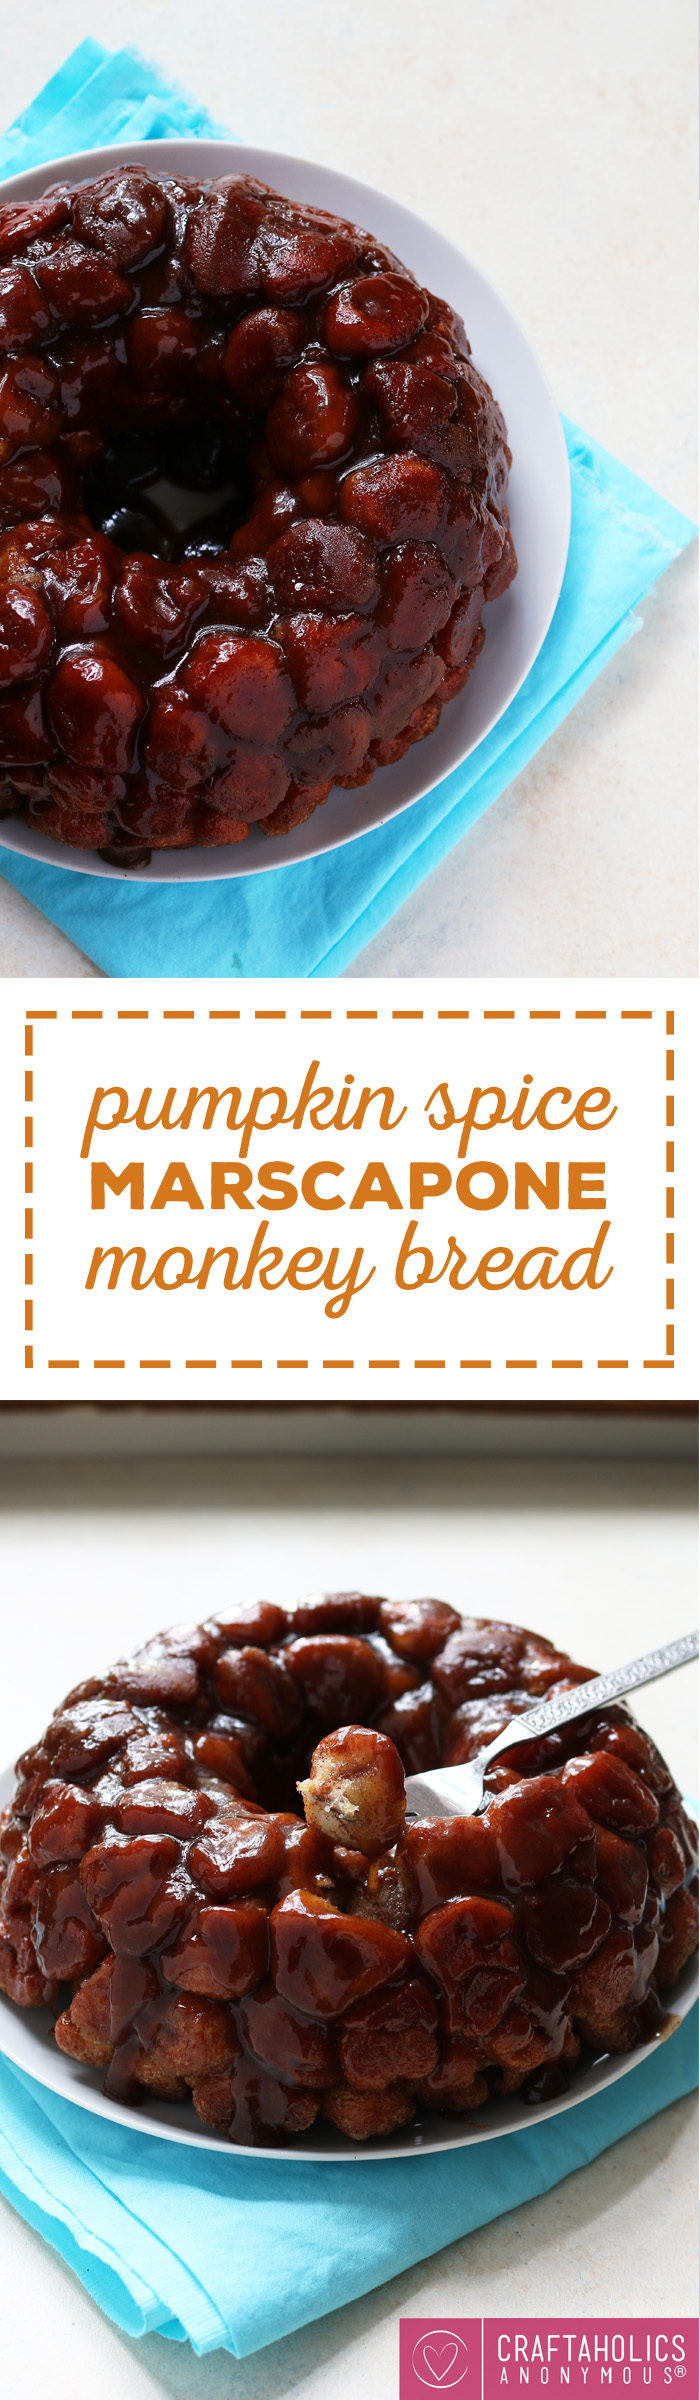 Pumpkin Spice Marscapone Monkey Bread - this amazing fall dessert will fill your home with a delicious aroma and be a sweet treat on crisp autumn nights! craftaholicsanonymous.net